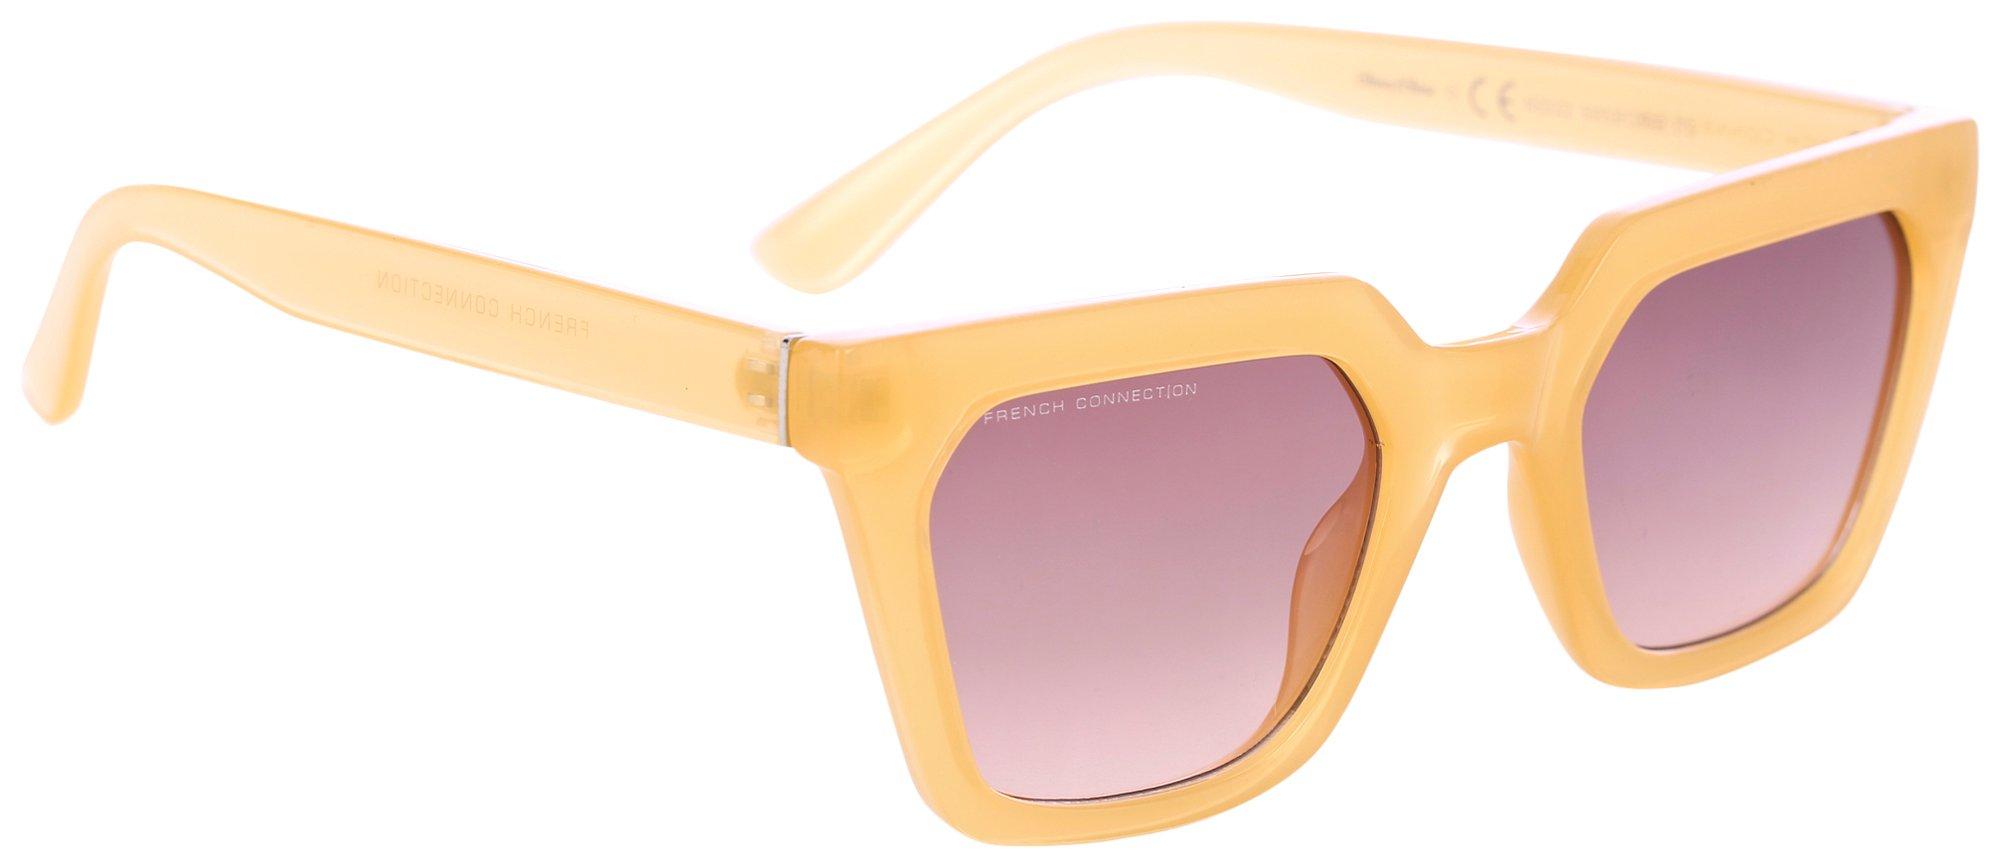 French Connection Womens Translucent Tinted Sunglasses